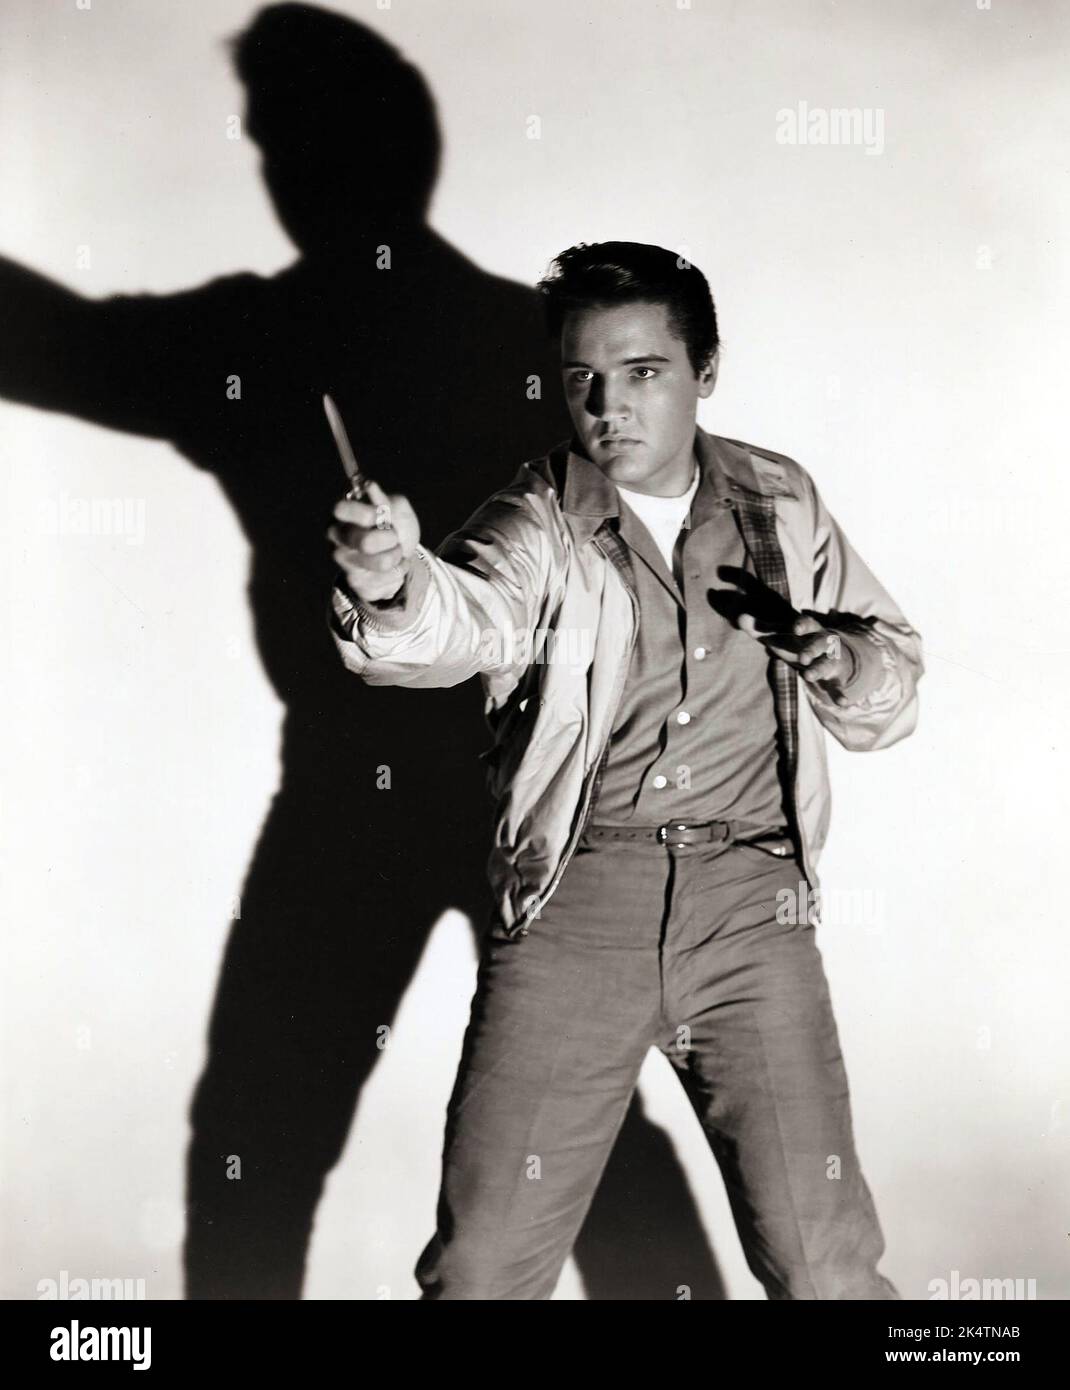 Elvis Presley with a knife. 'King Creole' (Paramount, 1958). Publicity photo. Stock Photo